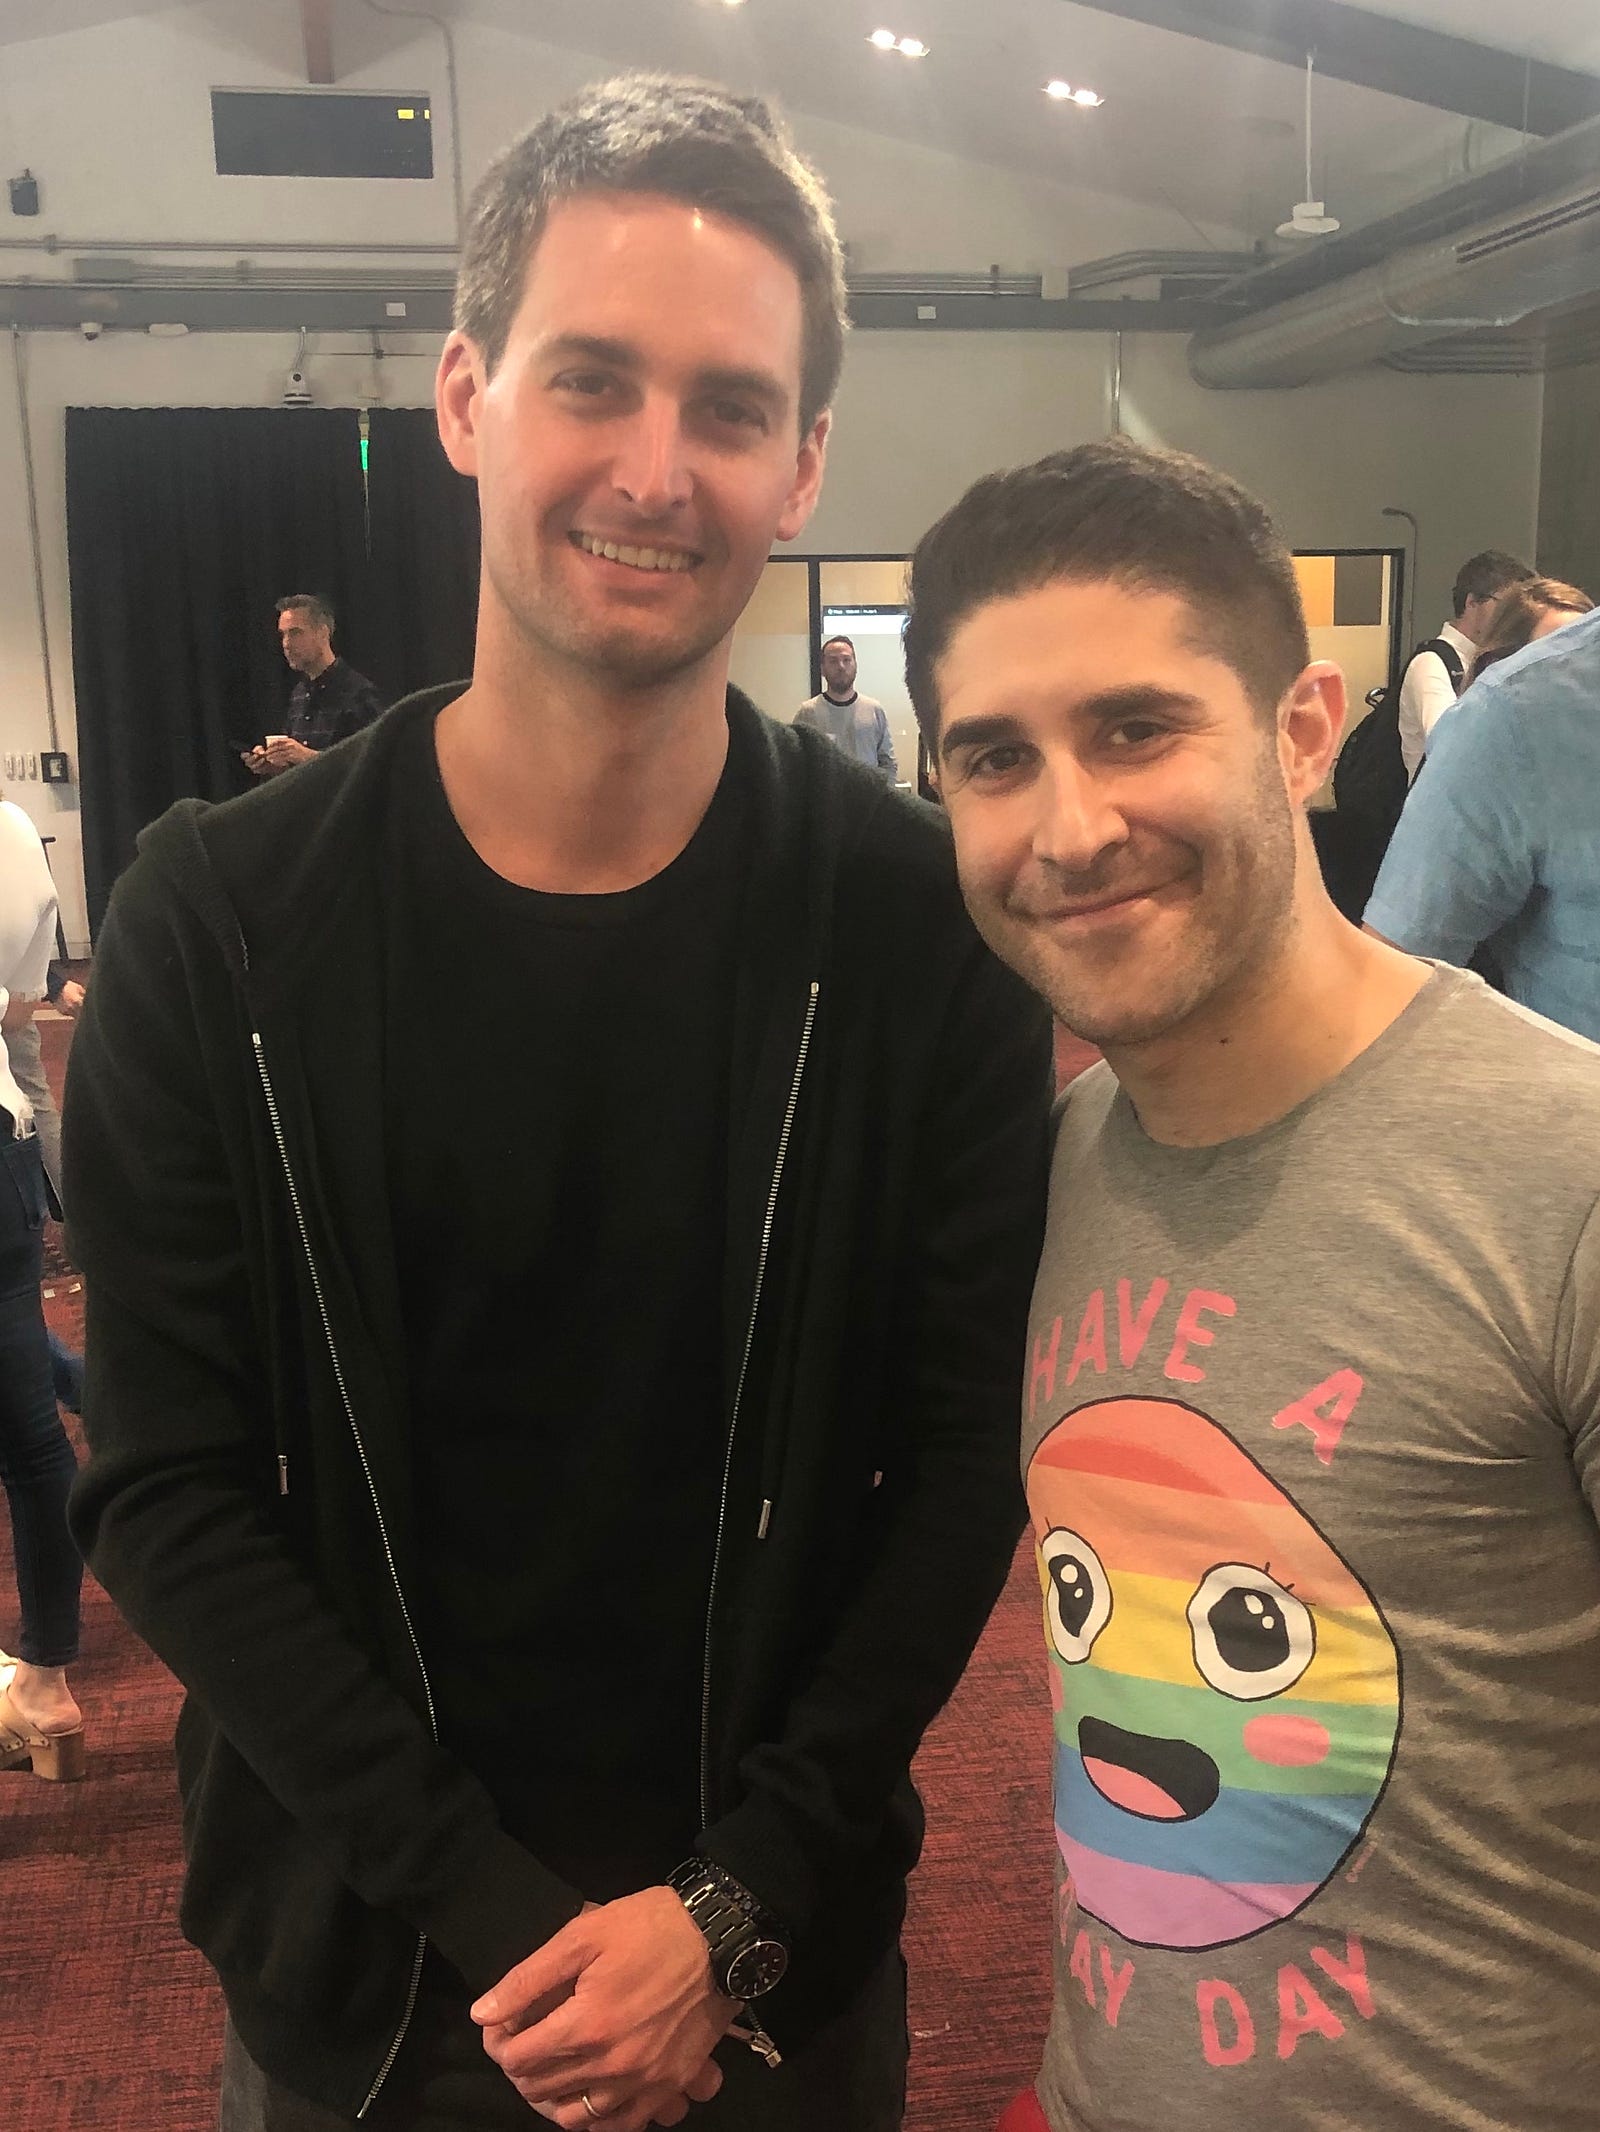 I’ve seen the future, and it’s yellow and vertical: What I learnt at Snap’s Partner Summit